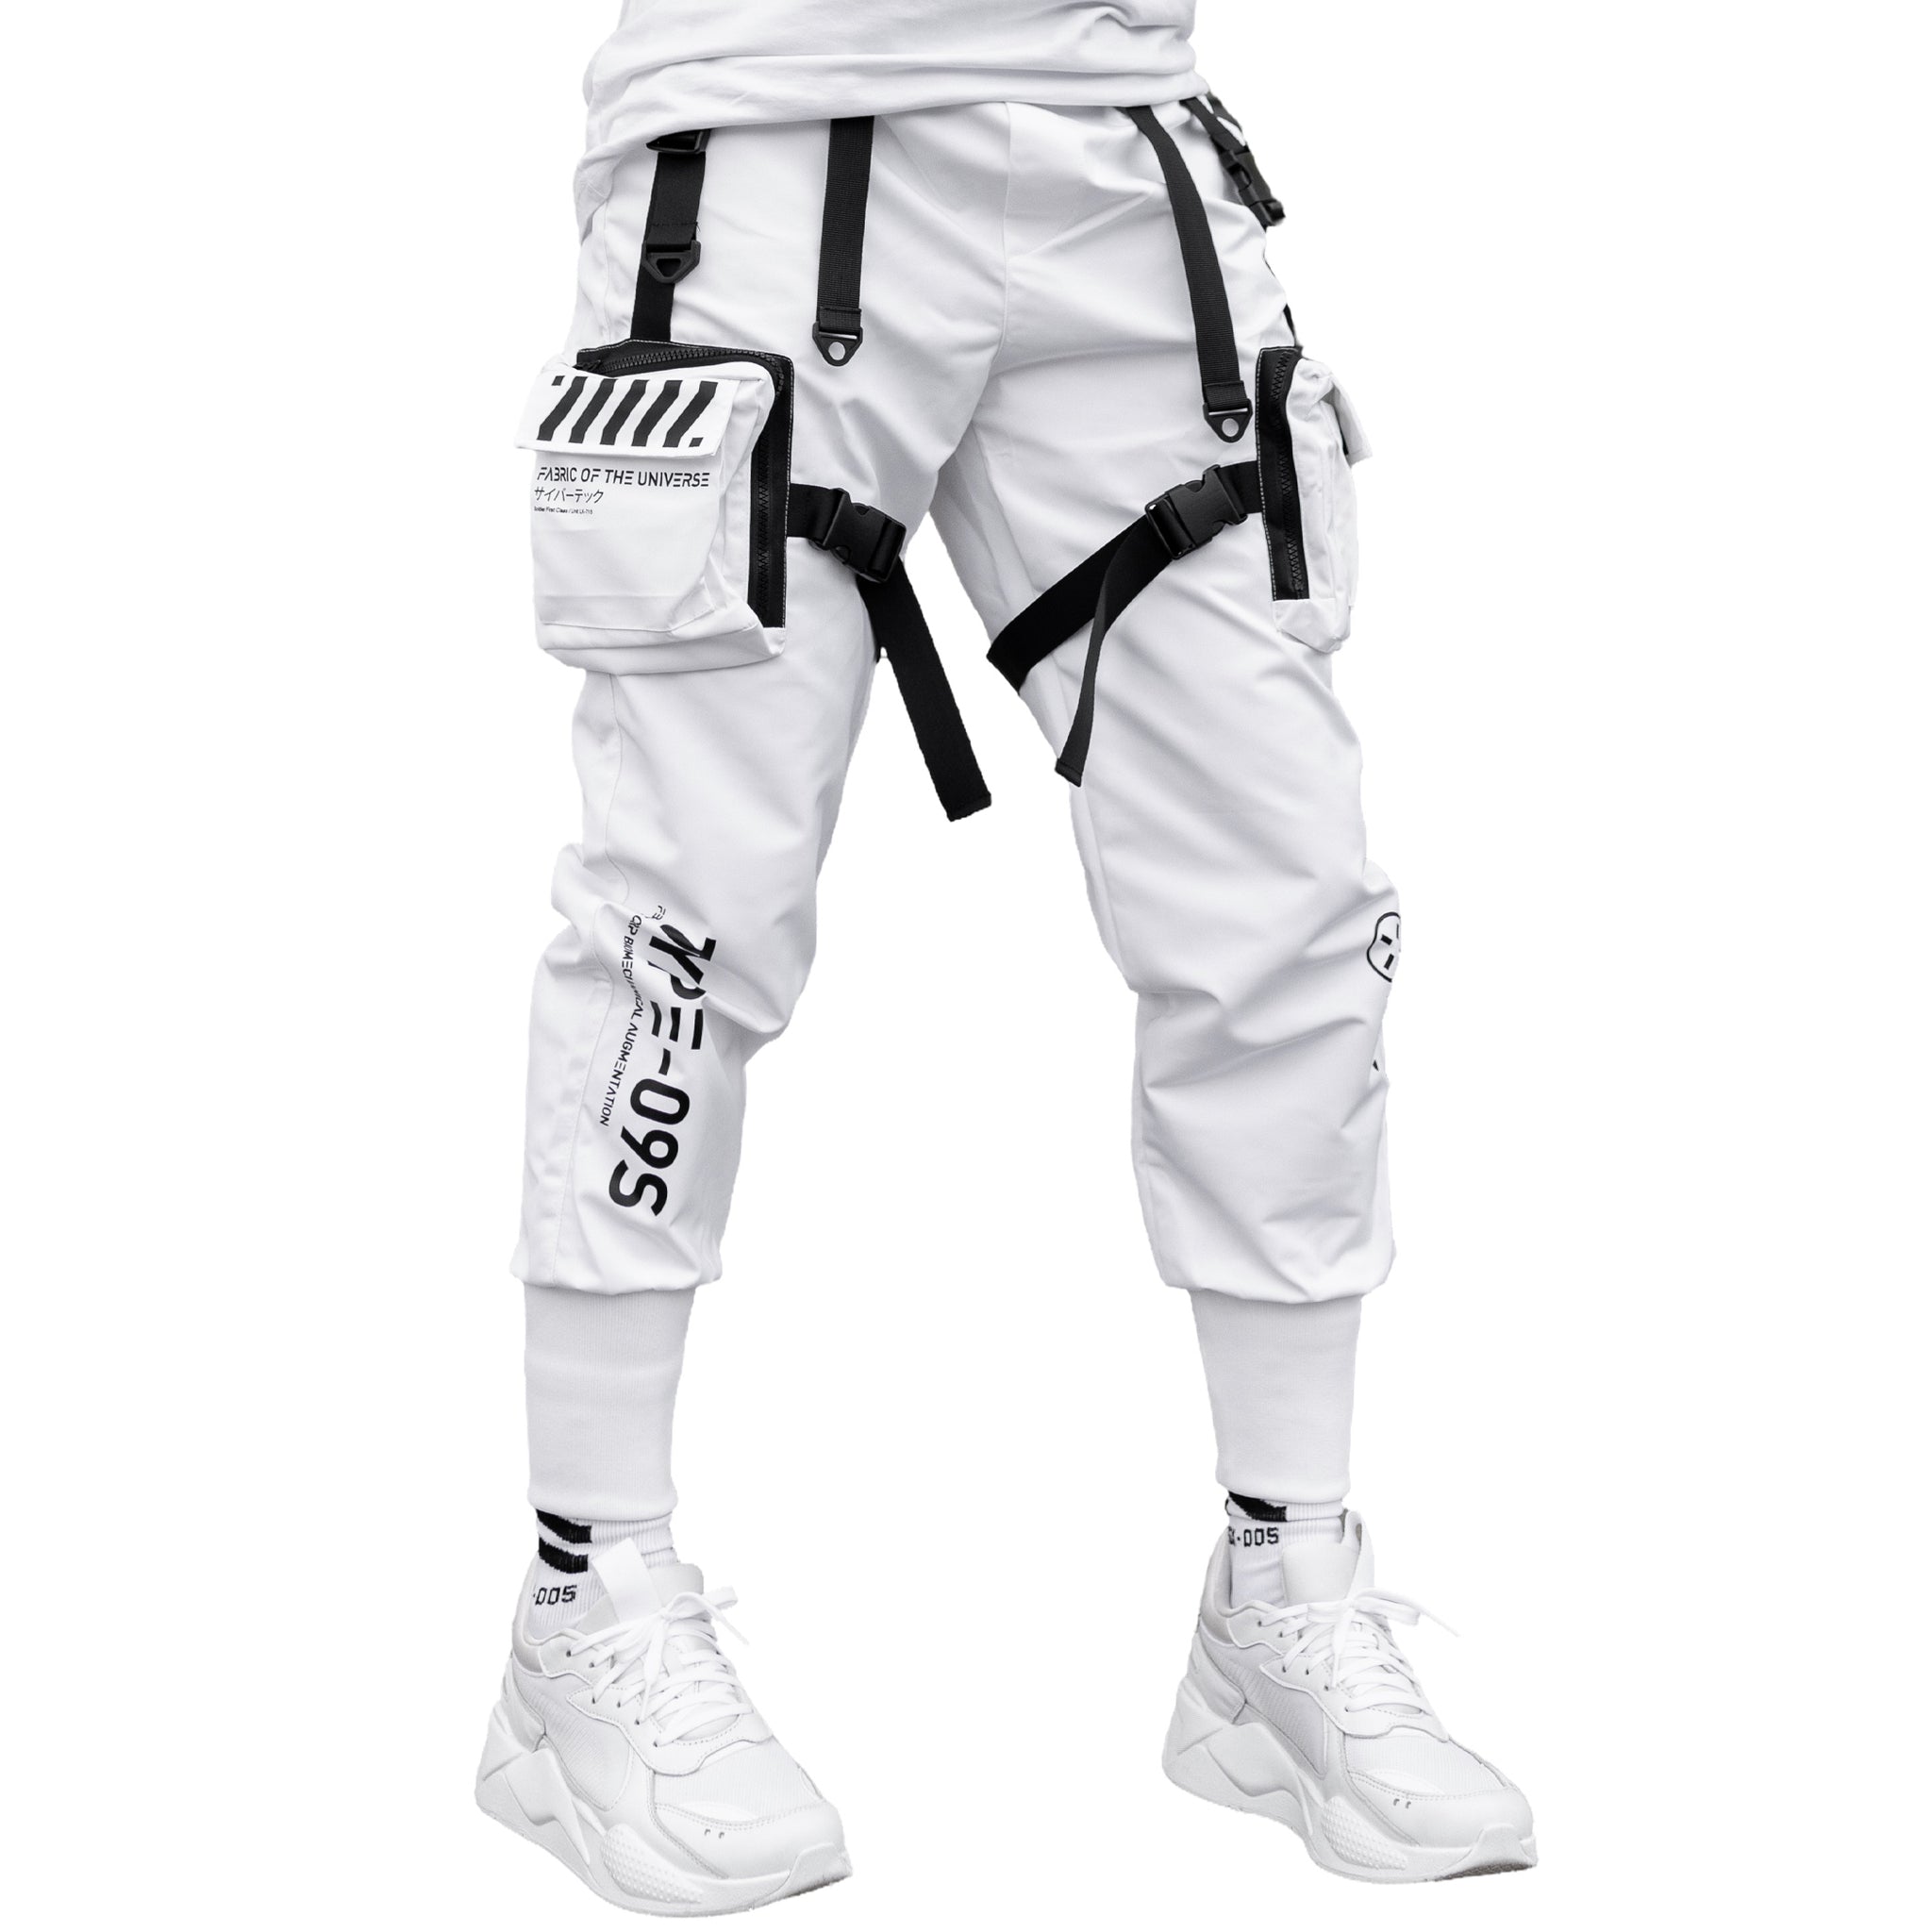 CG-Type 08R White Cargo Pants - Fabric of the Universe